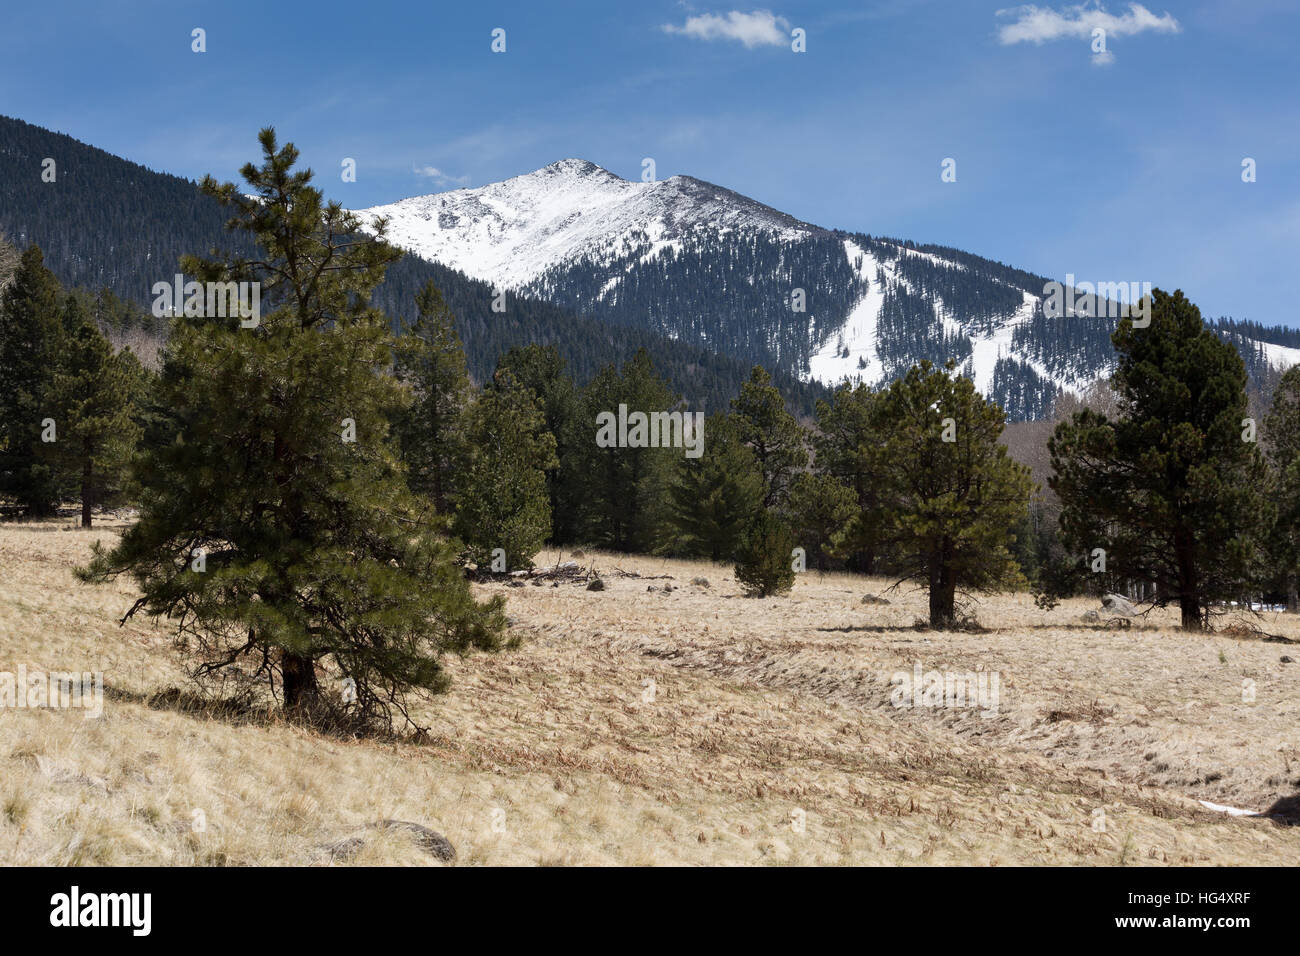 A small meadow among a pine tree forest below the San Francisco Peaks and Snowbowl Ski Resort. Coconino National Forest, Arizona Stock Photo